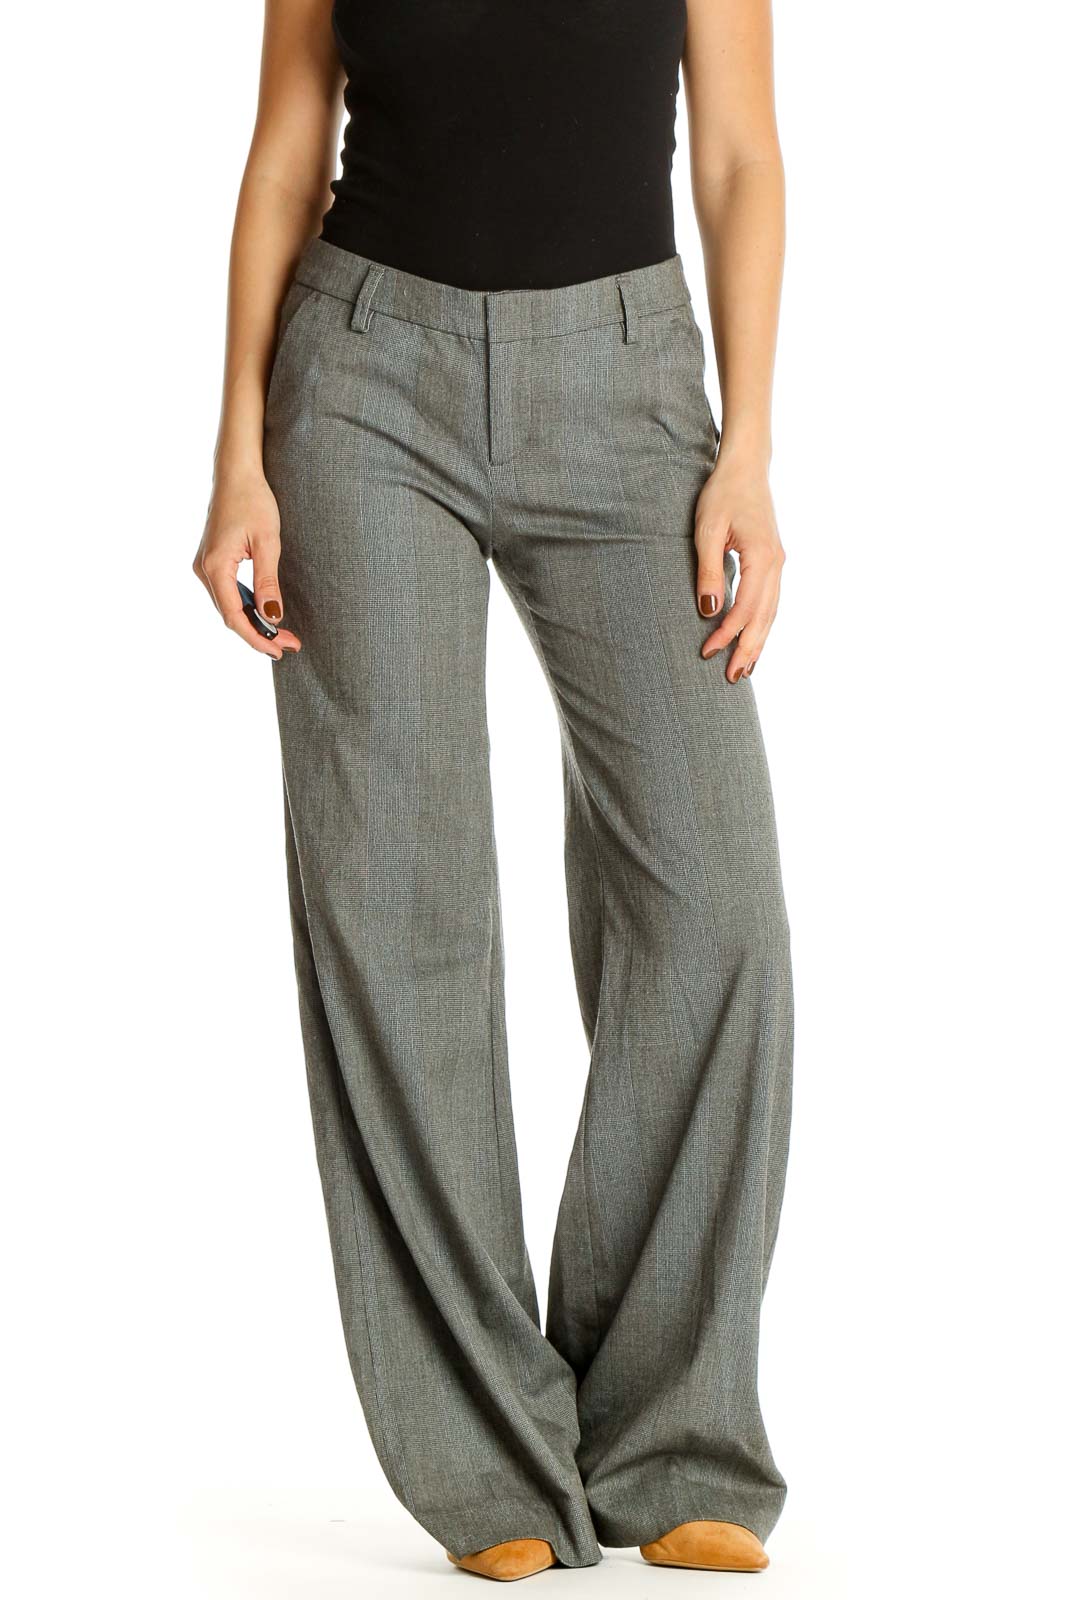 Masculine polyviscose trousers